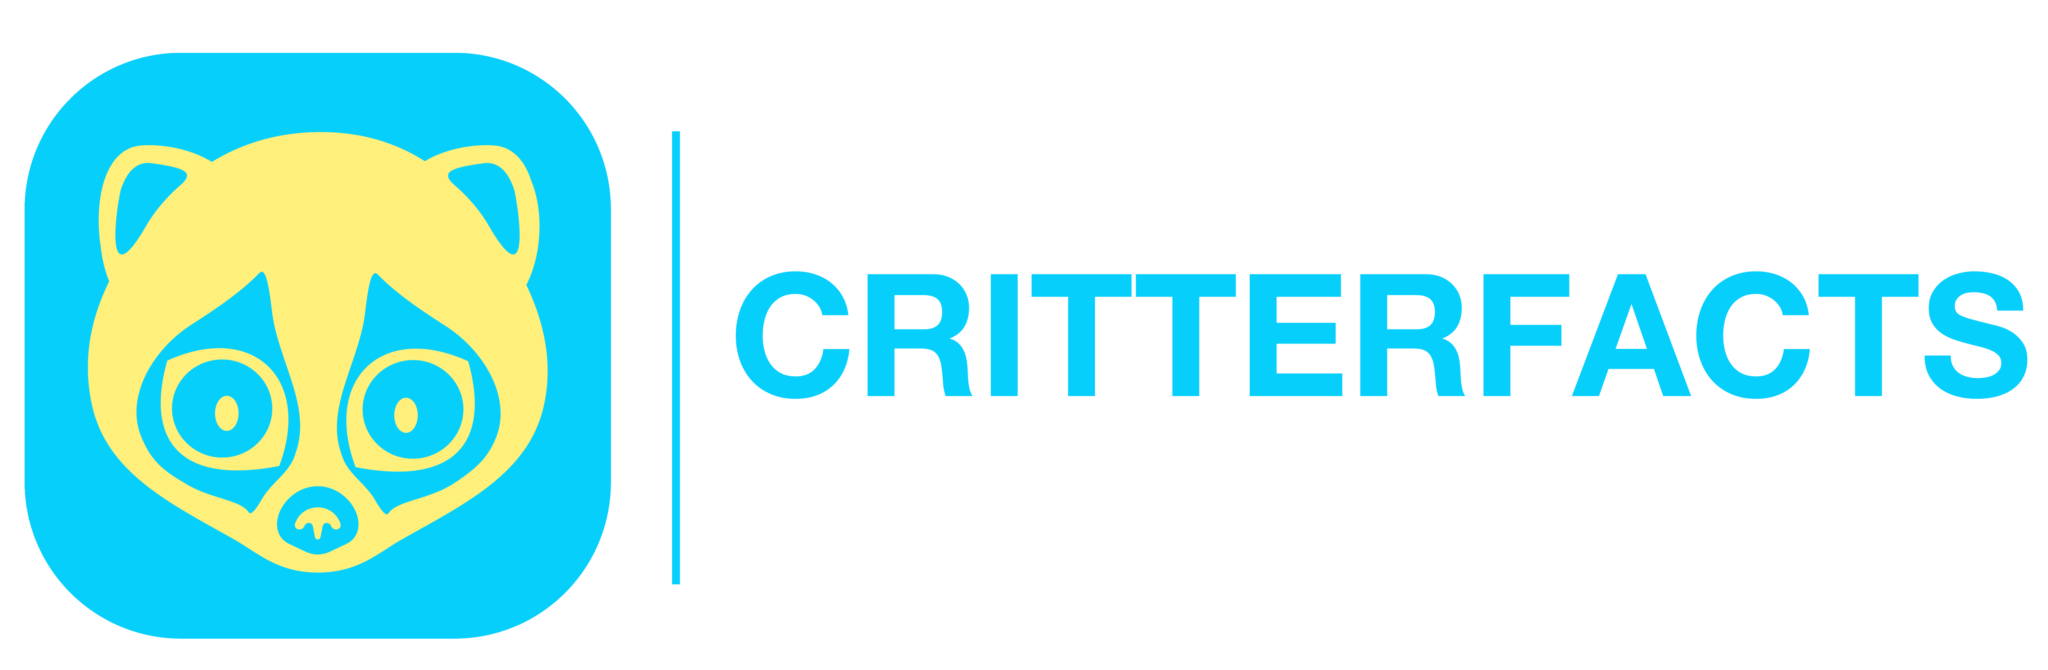 CRITTERFACTS